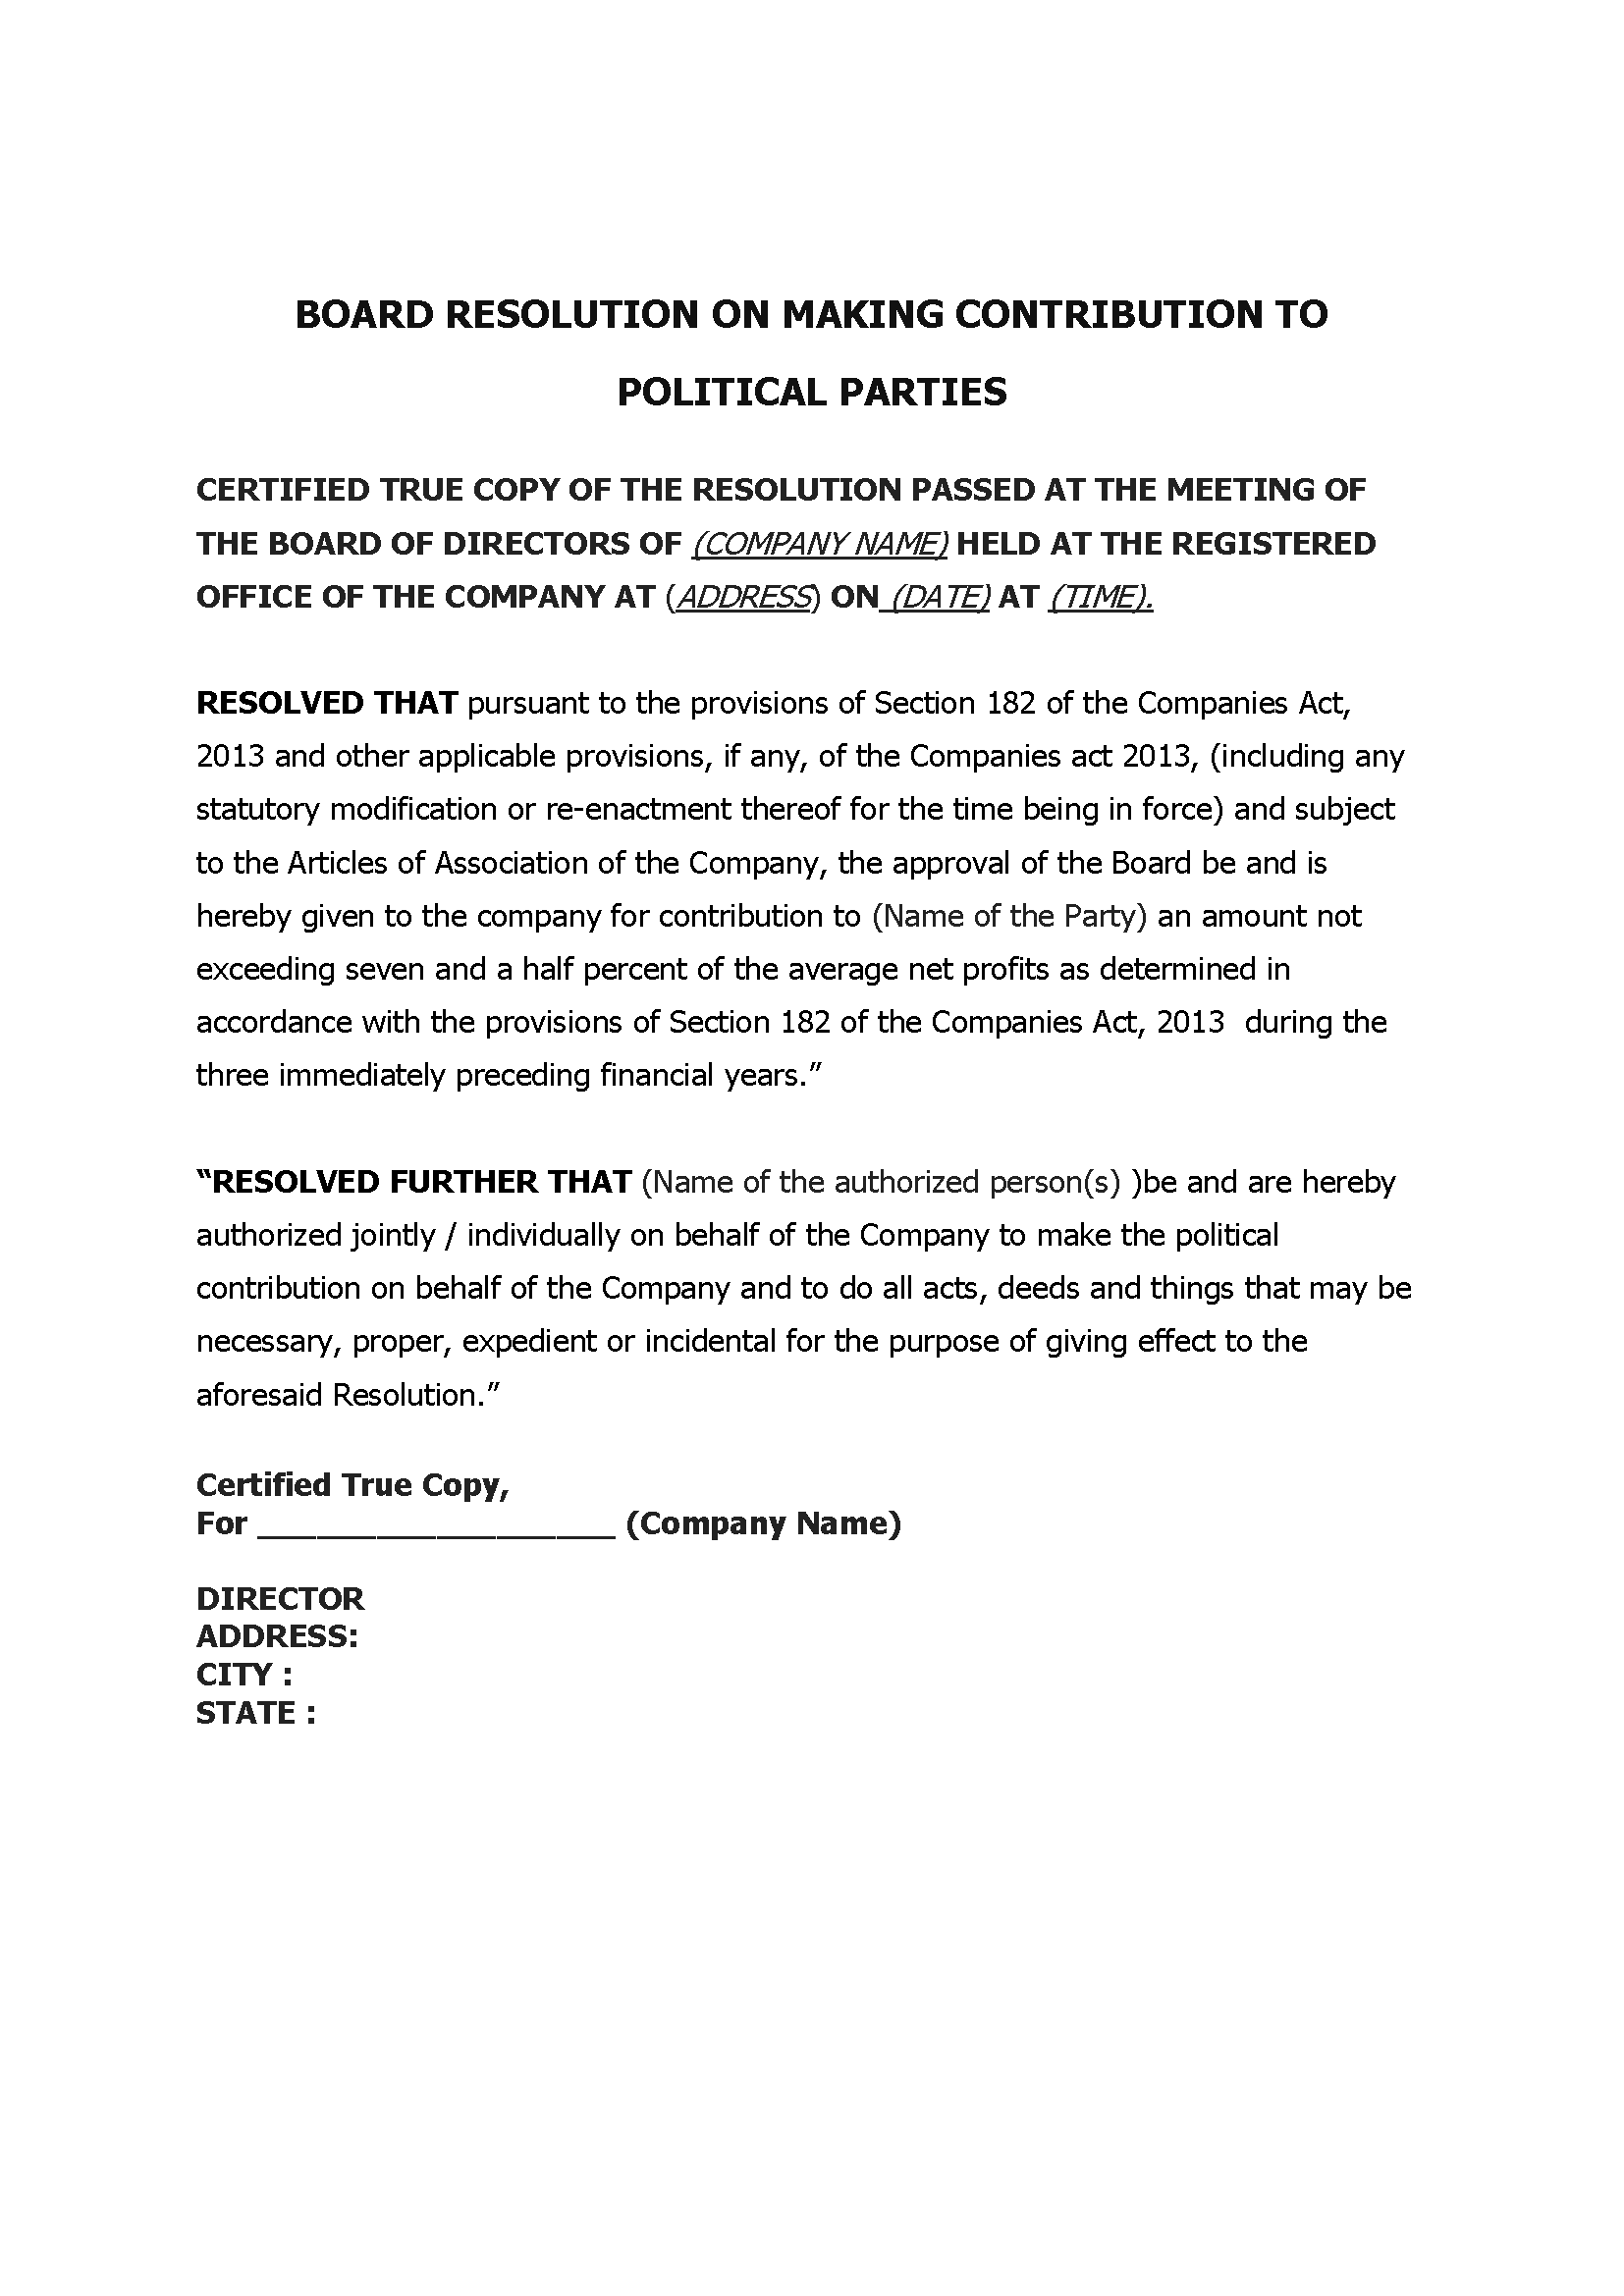 Board Resolution On Making Contribution To Political Parties